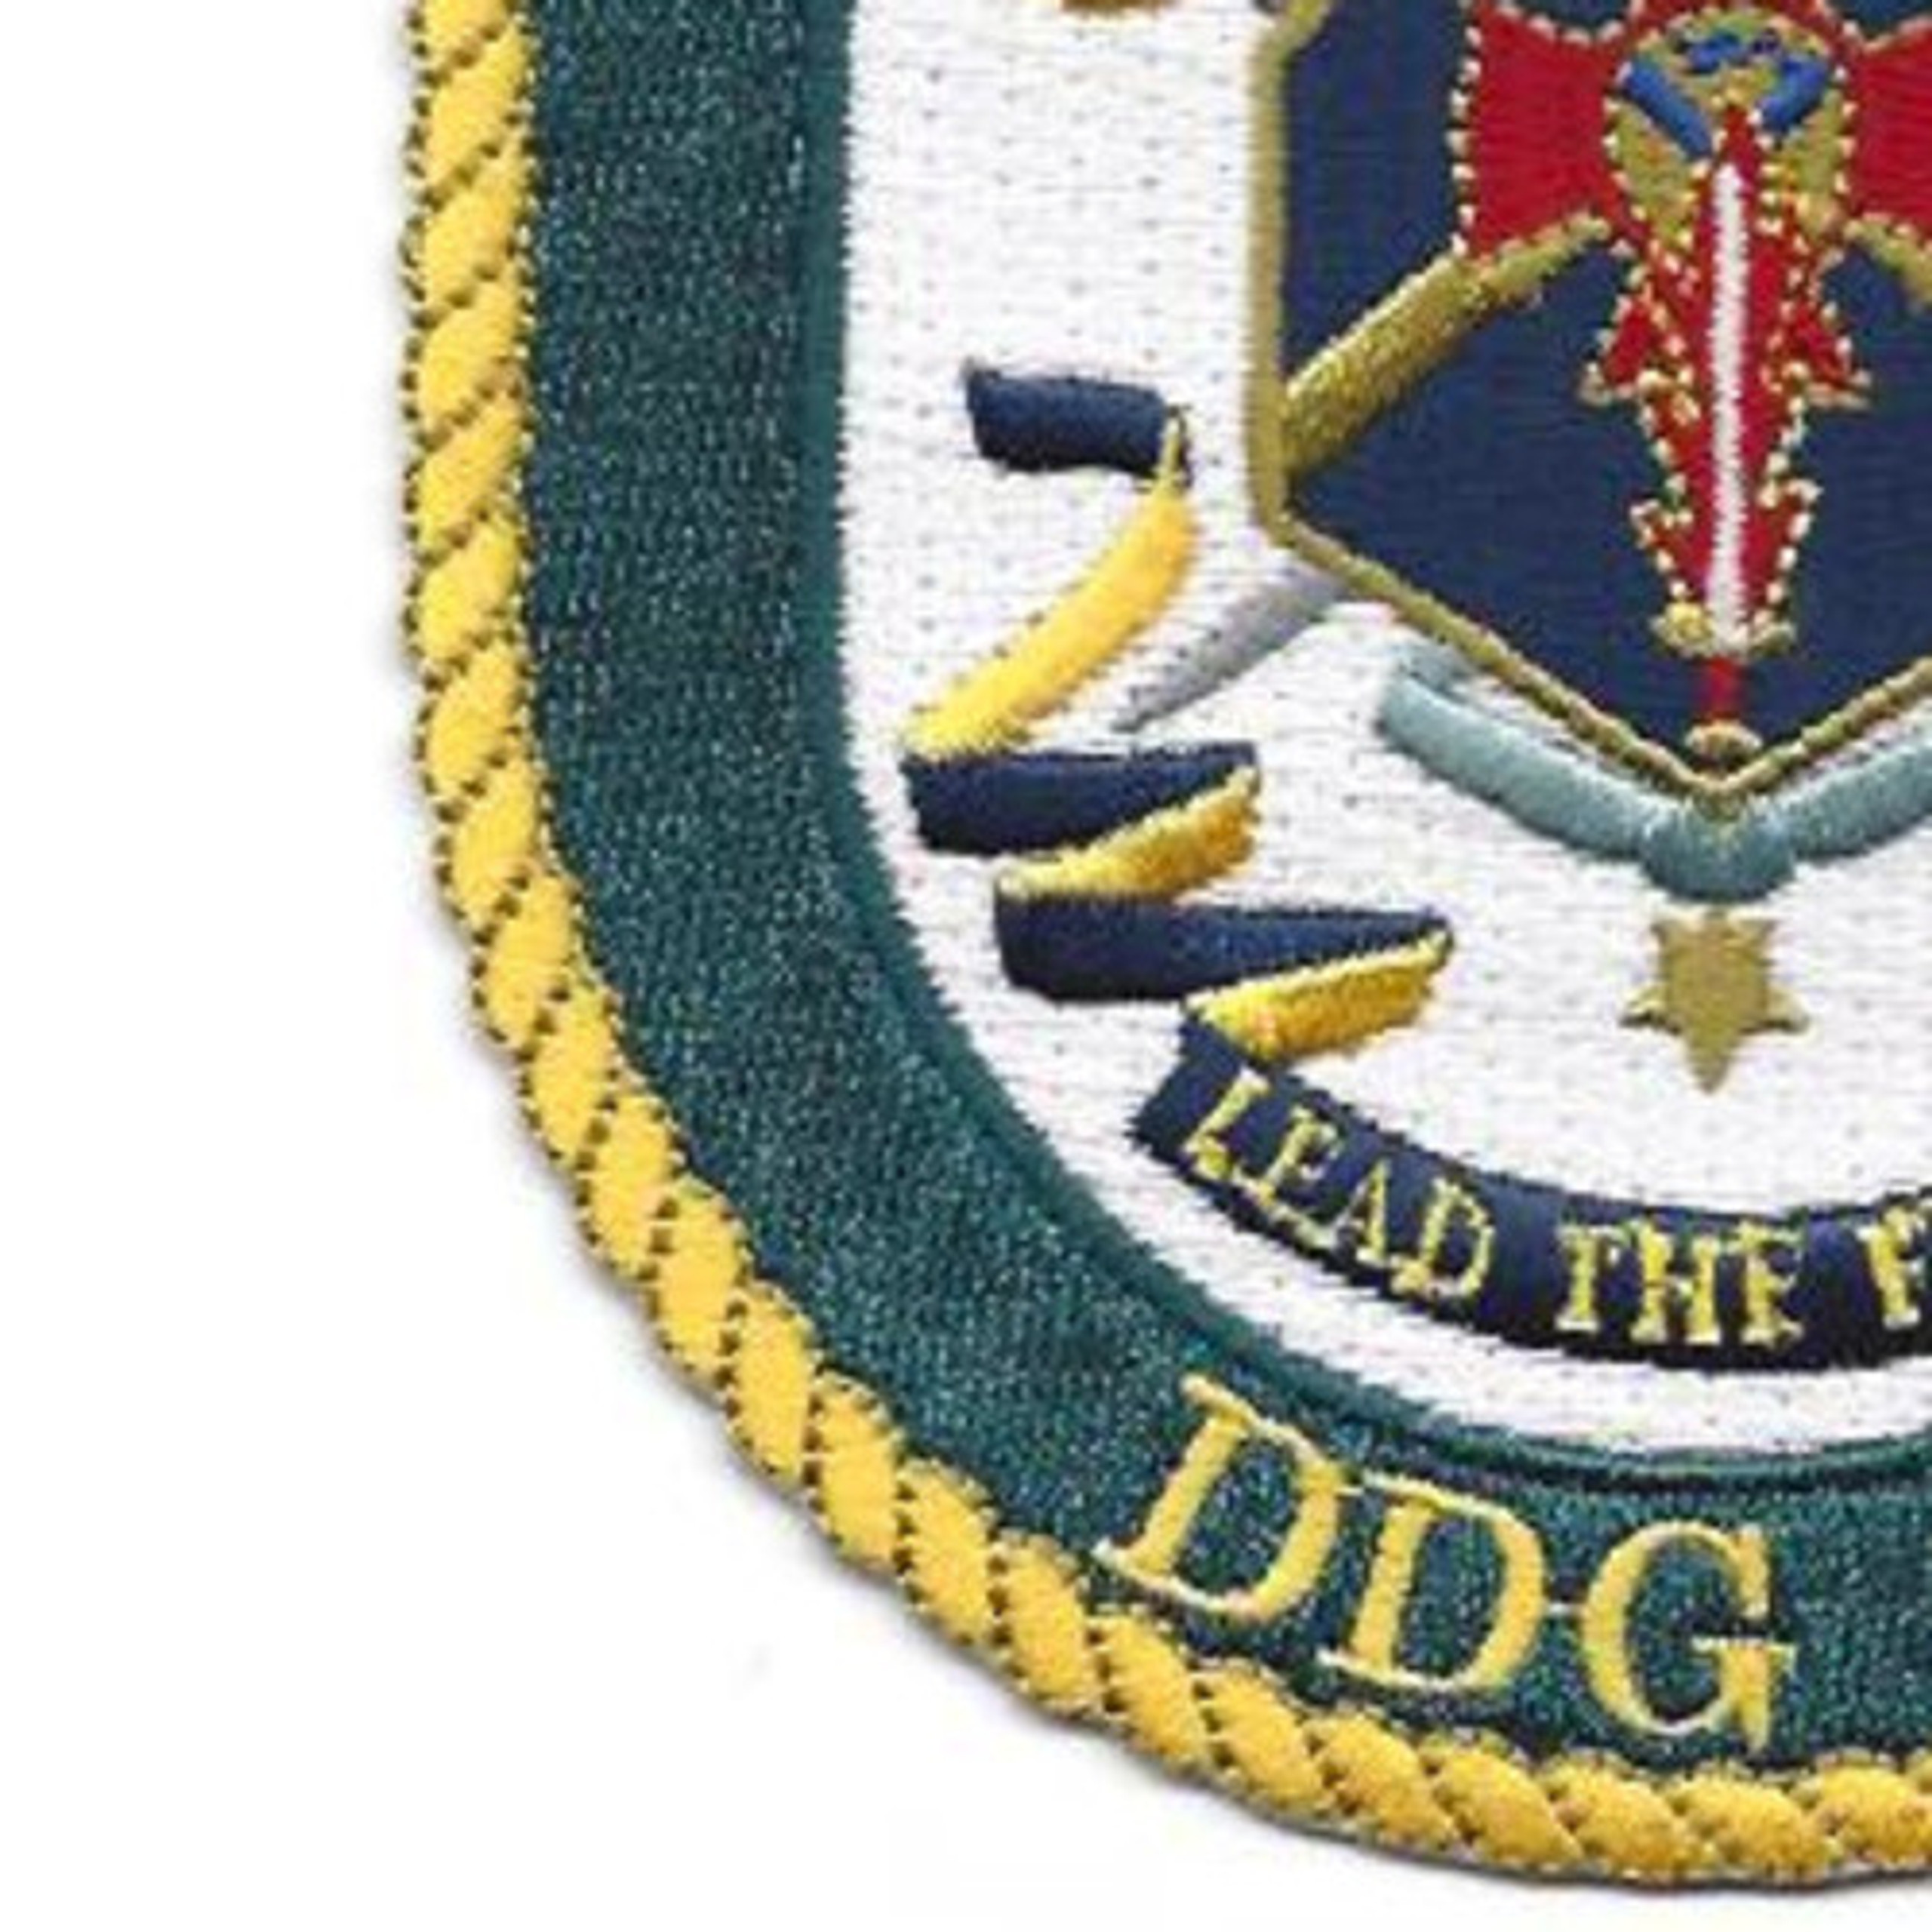 USS Micheal Murphy DDG-112 Guided Missile Destroyer Ship Patch-A ...